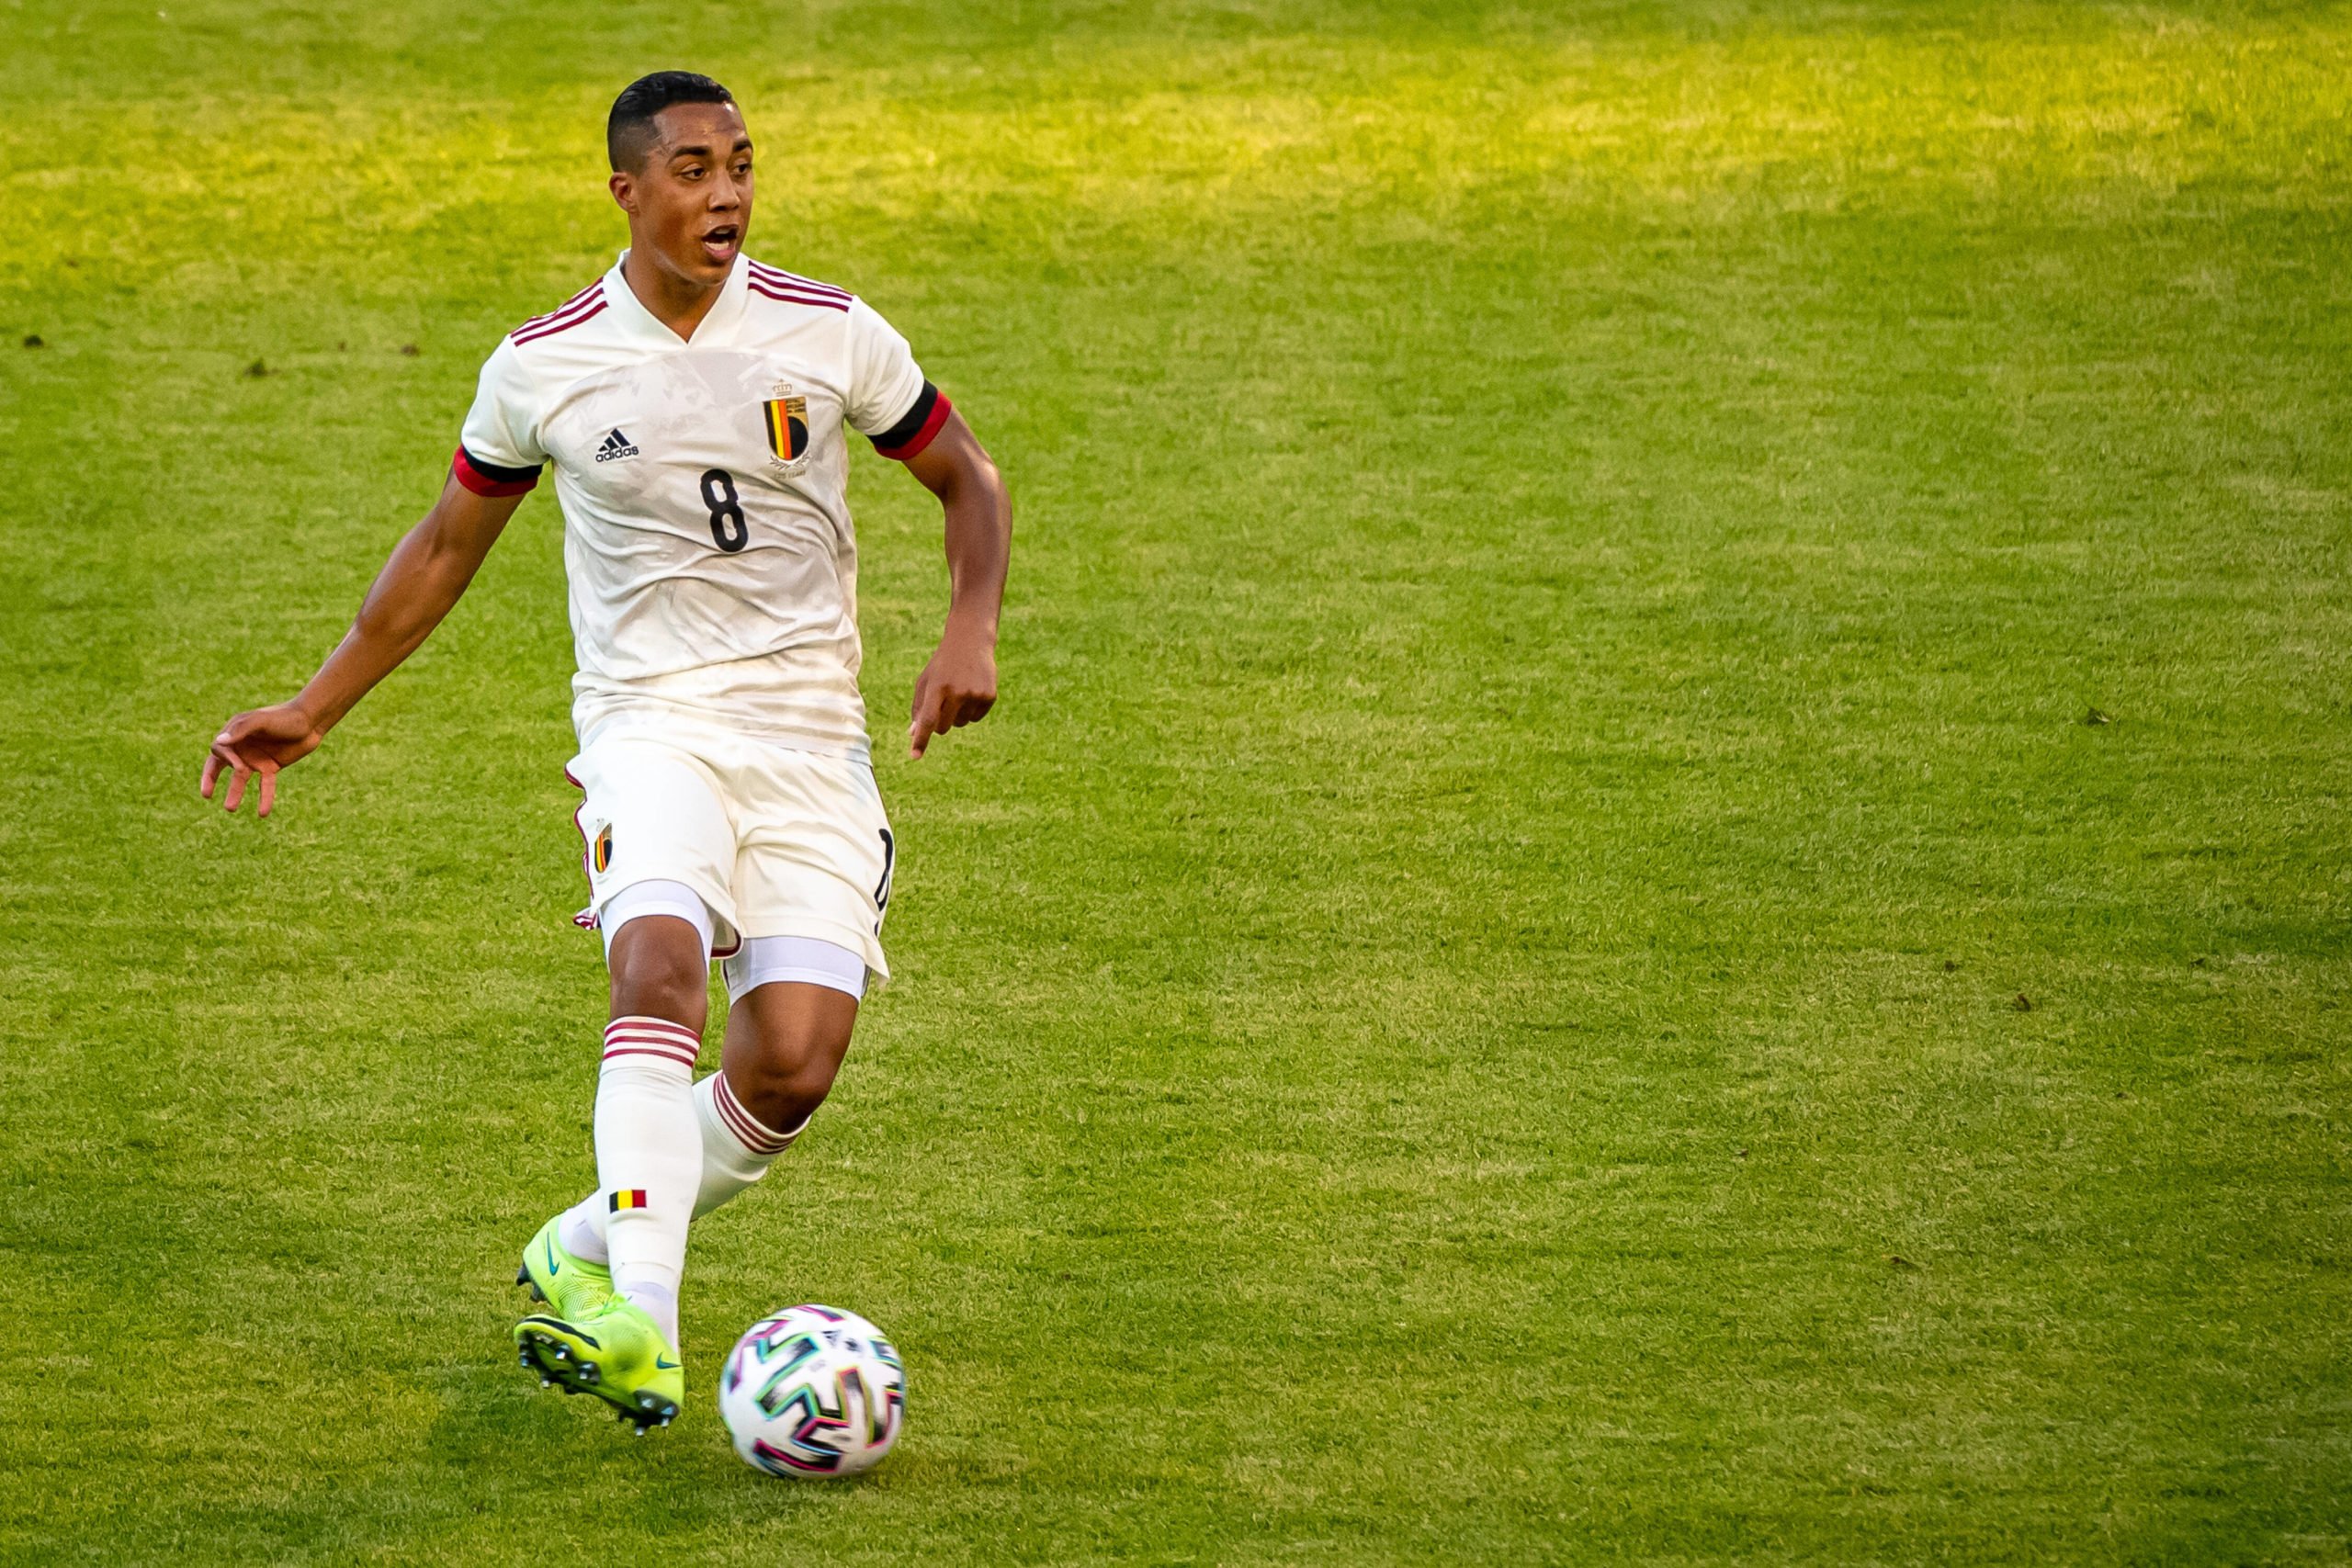 Real Madrid showing interest in Tielemans who is seen in the picture